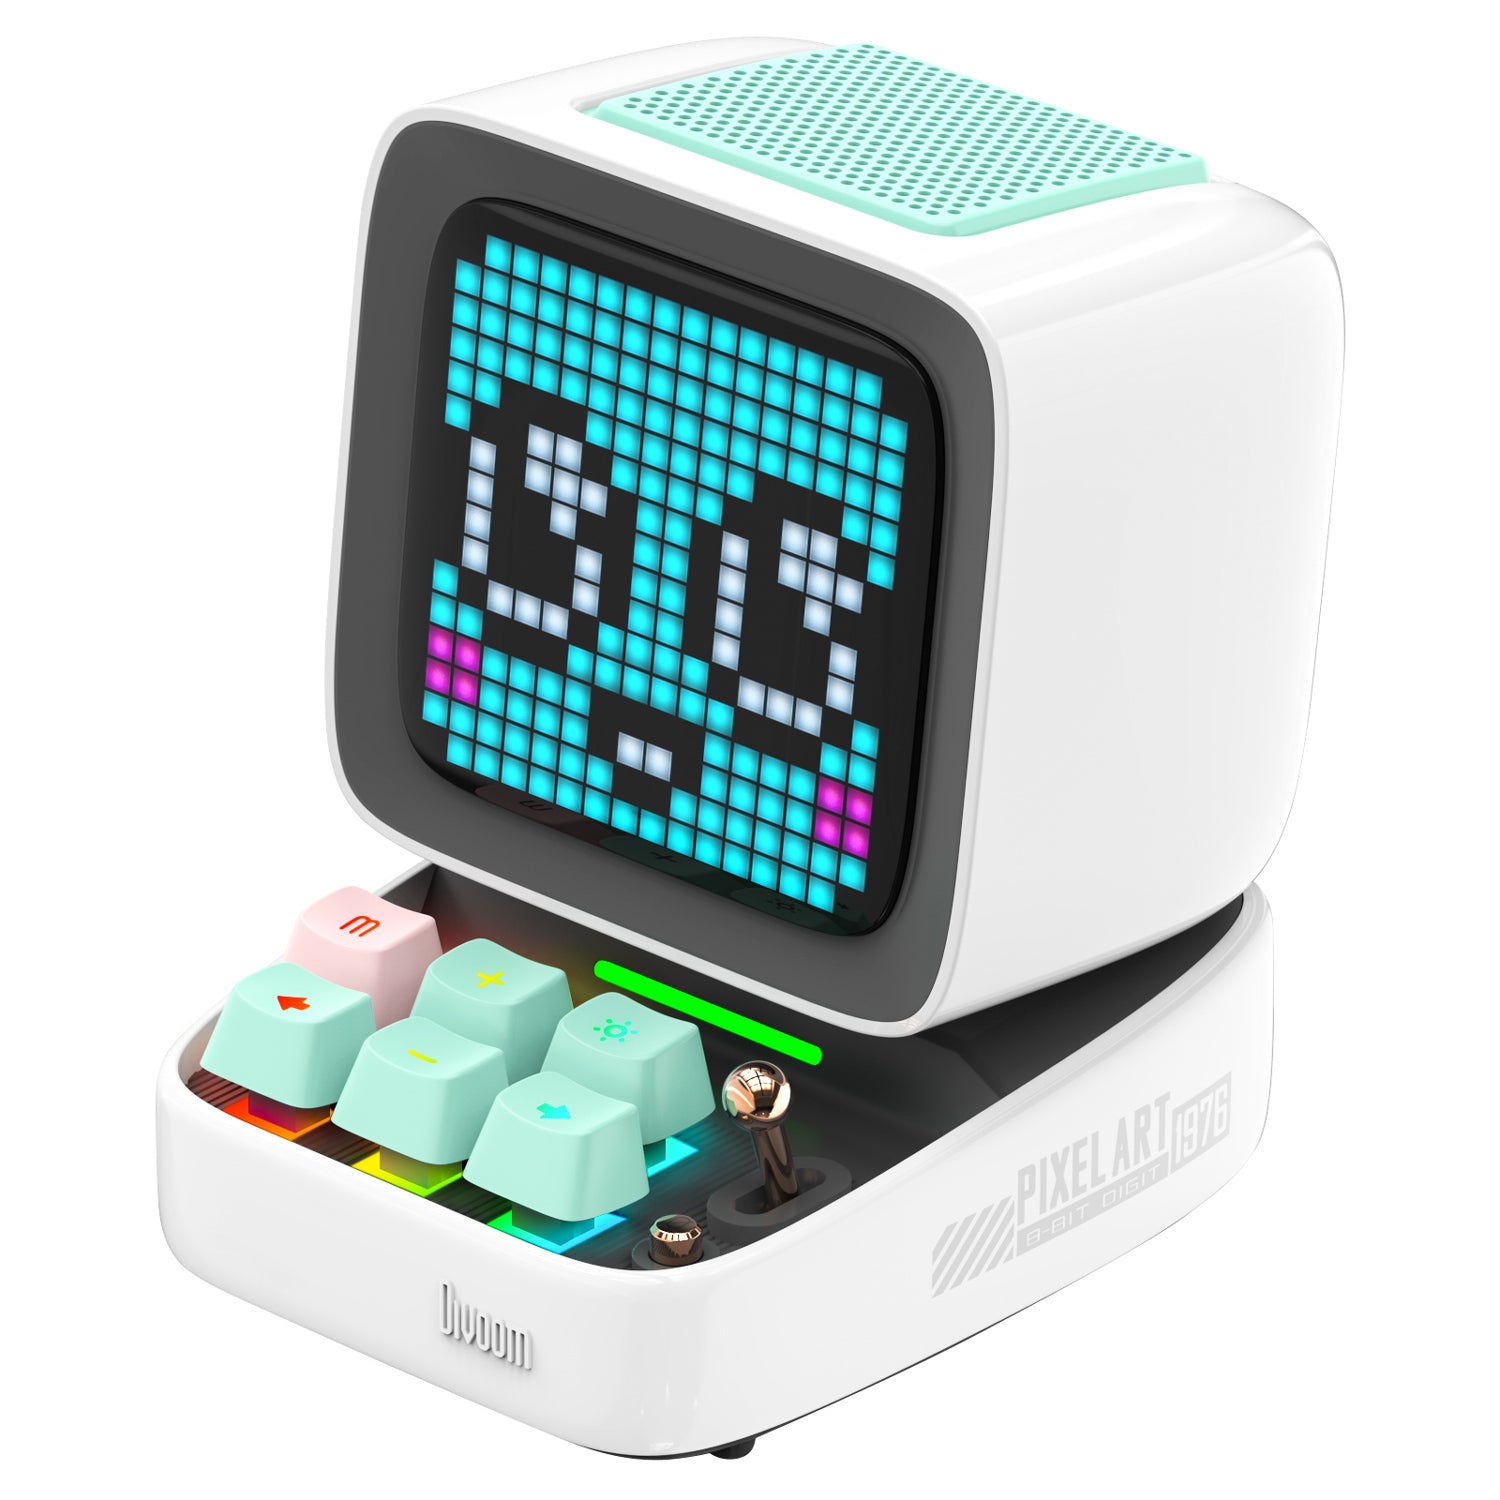  Divoom Times Gate - Cute Gaming Digital Clock with Smart  App-Controlled, Support Weather Forecast, Stock Market/Exchange Rate,  Social Media, Pixel Art Display for Gamers & Home Office Decor (Pink) : Home